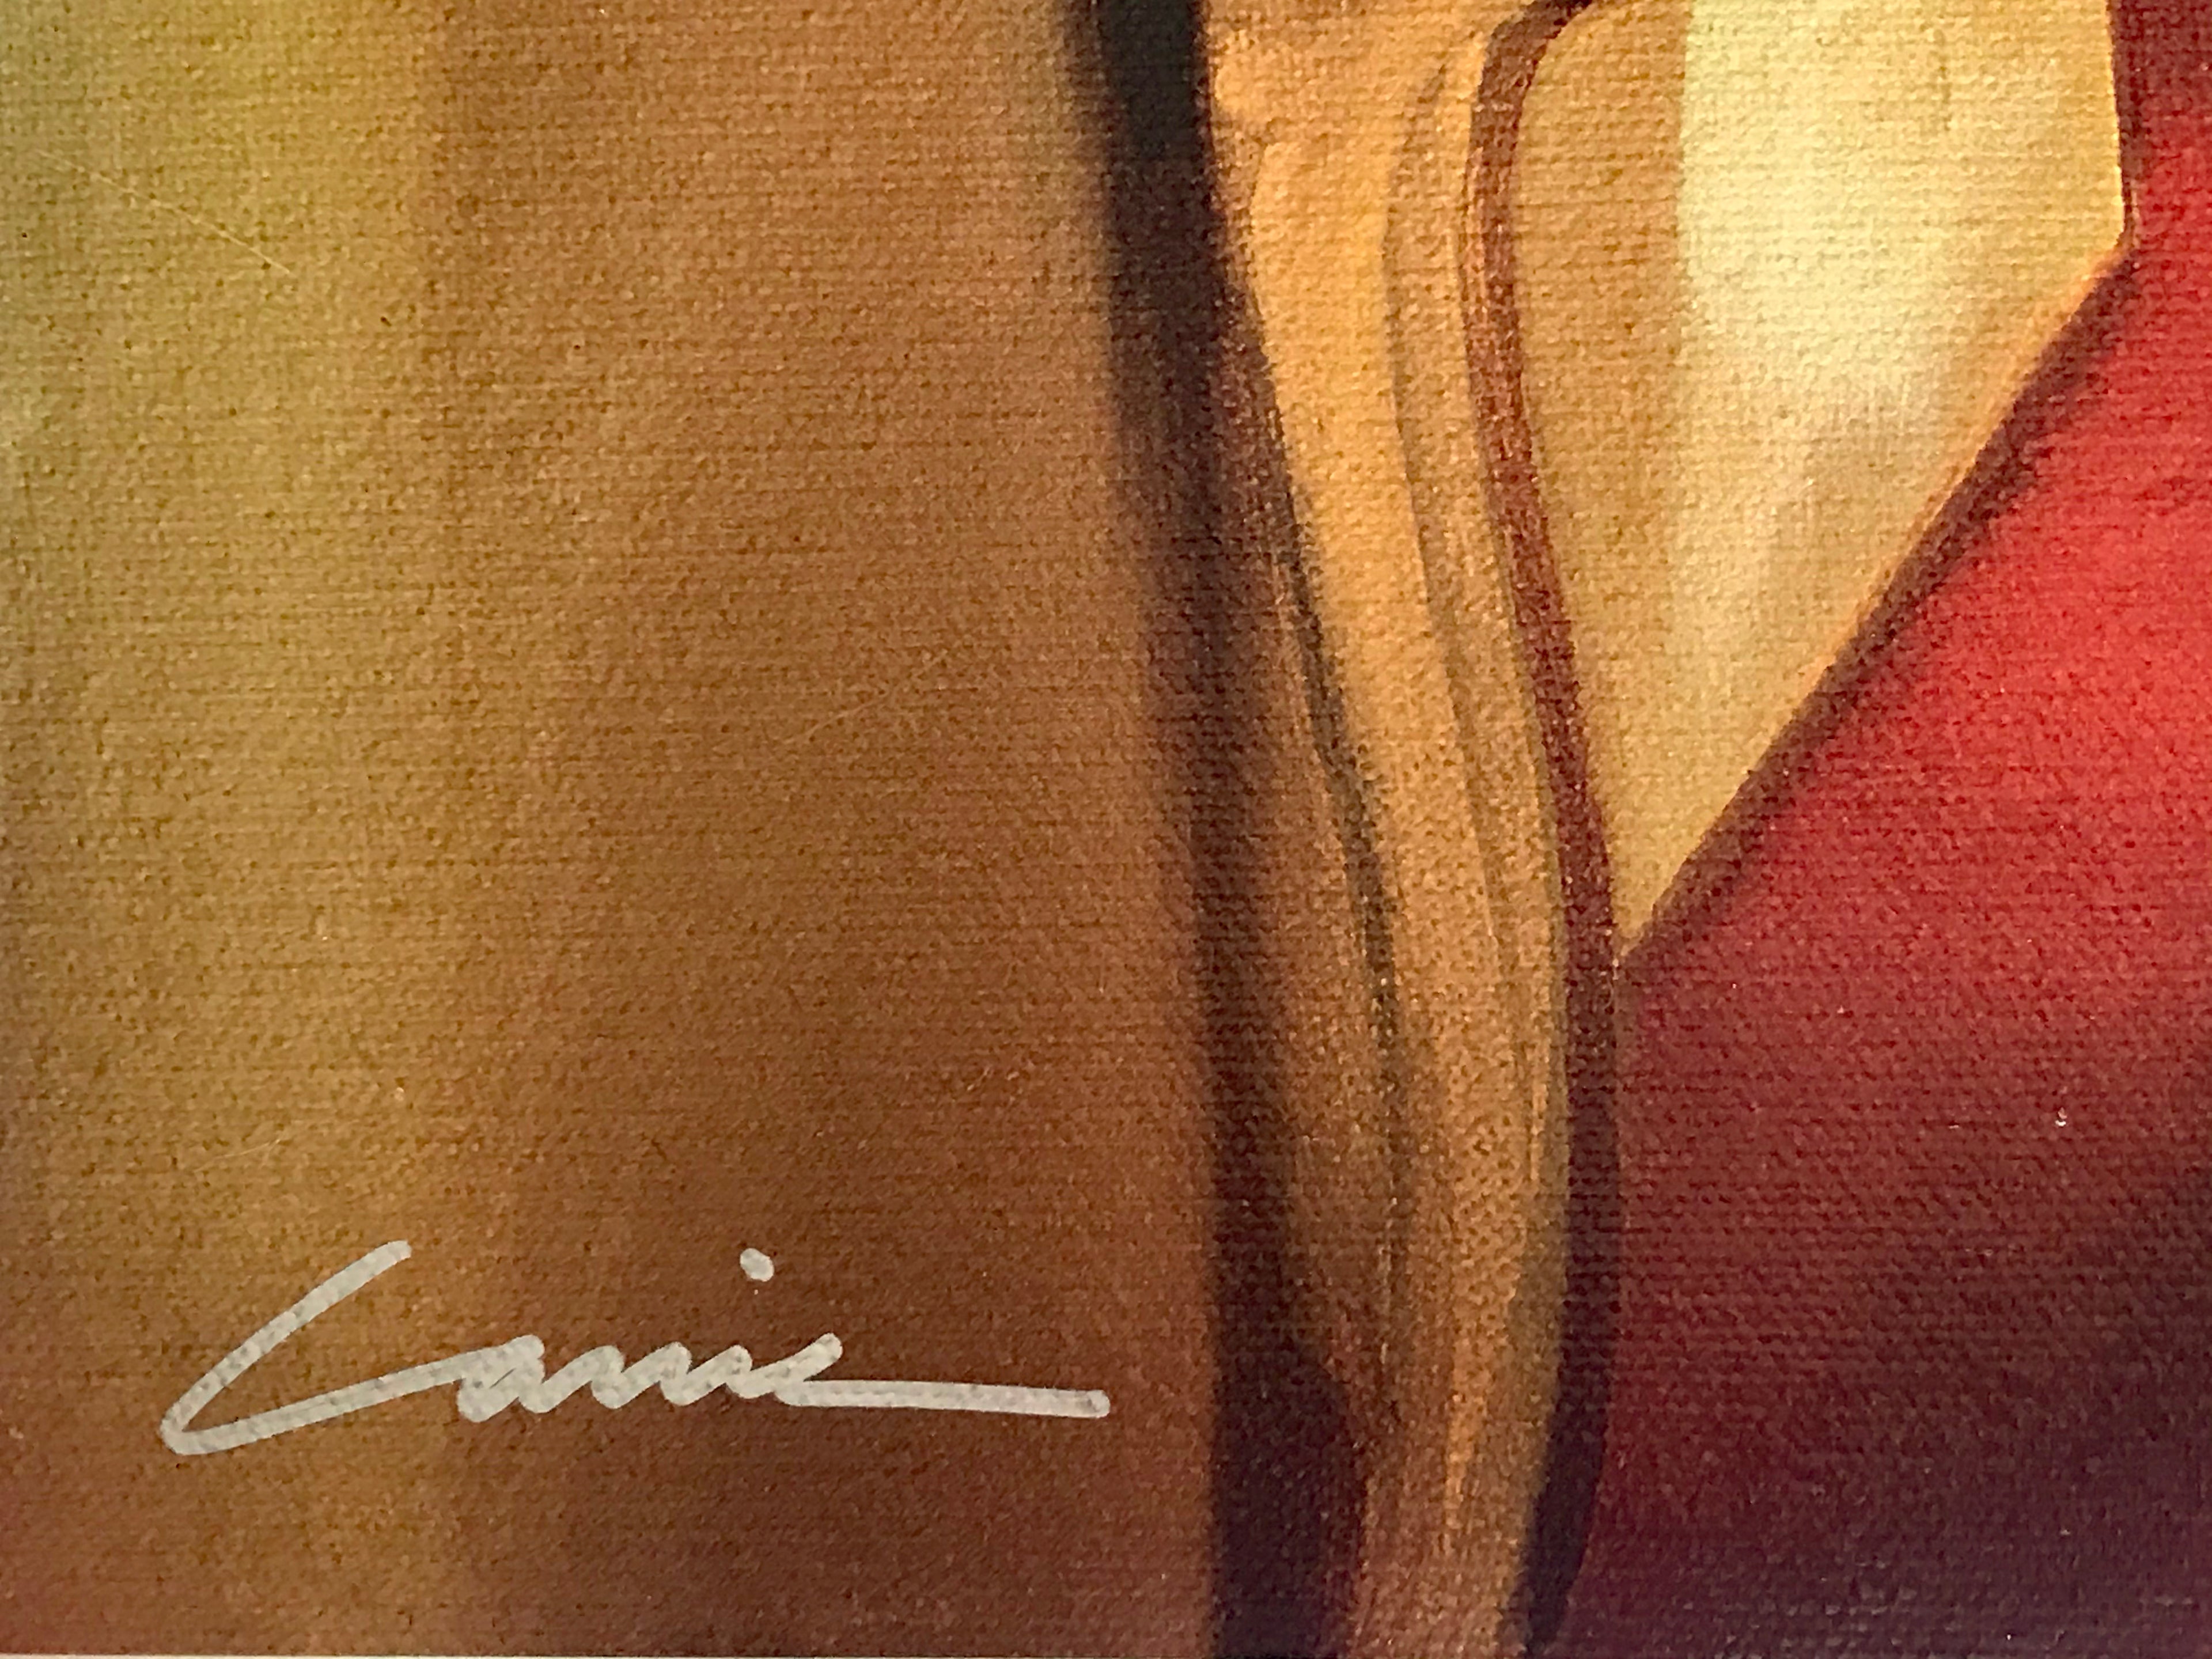 Reclined Read Carrie Graber Canvas Giclée Print Artist Hand Signed and Numbered